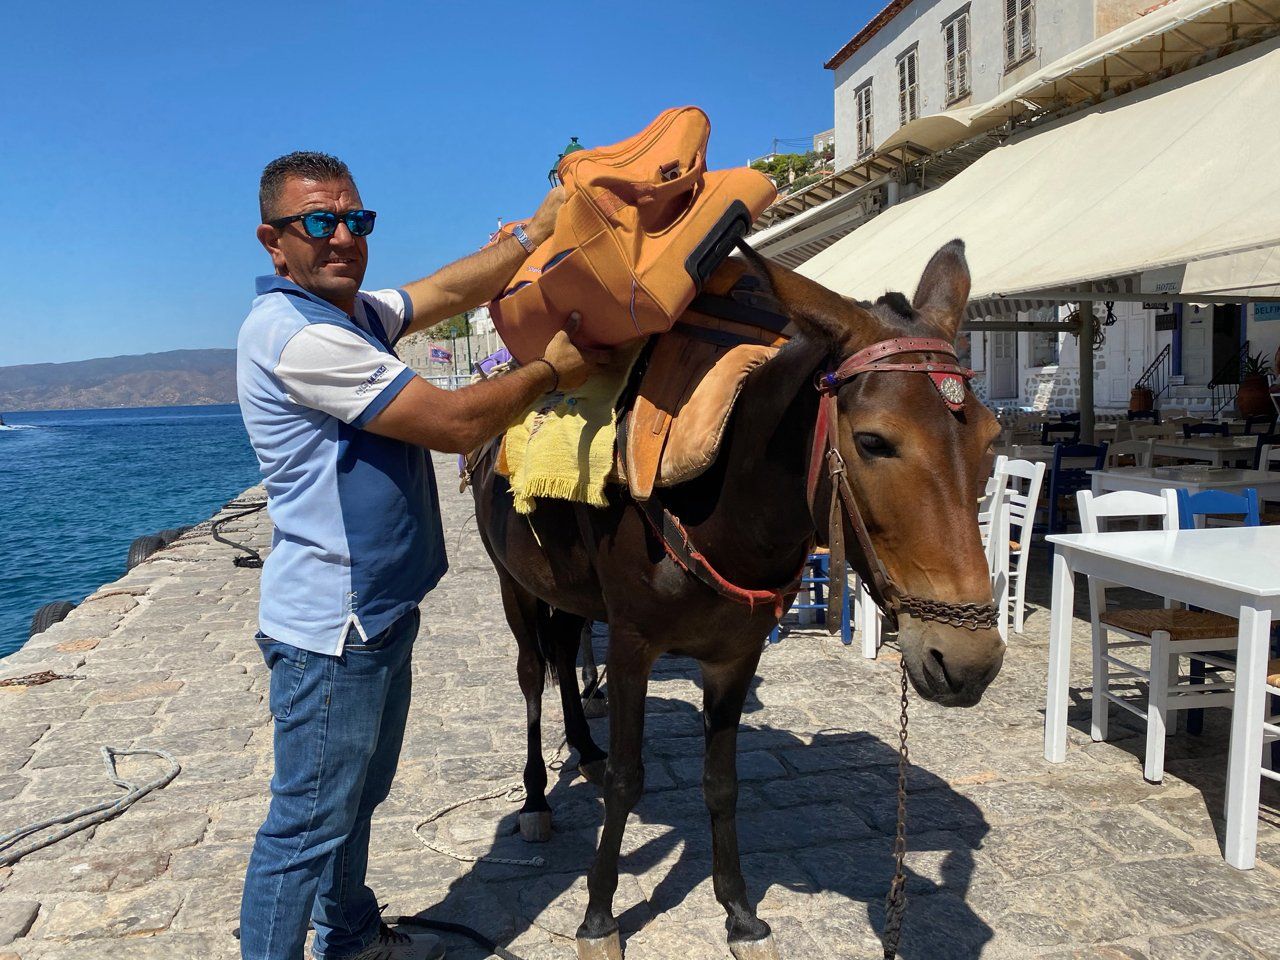 Luggage transfers to your hotels and accommodation on Hydra Island Greece is by mule.